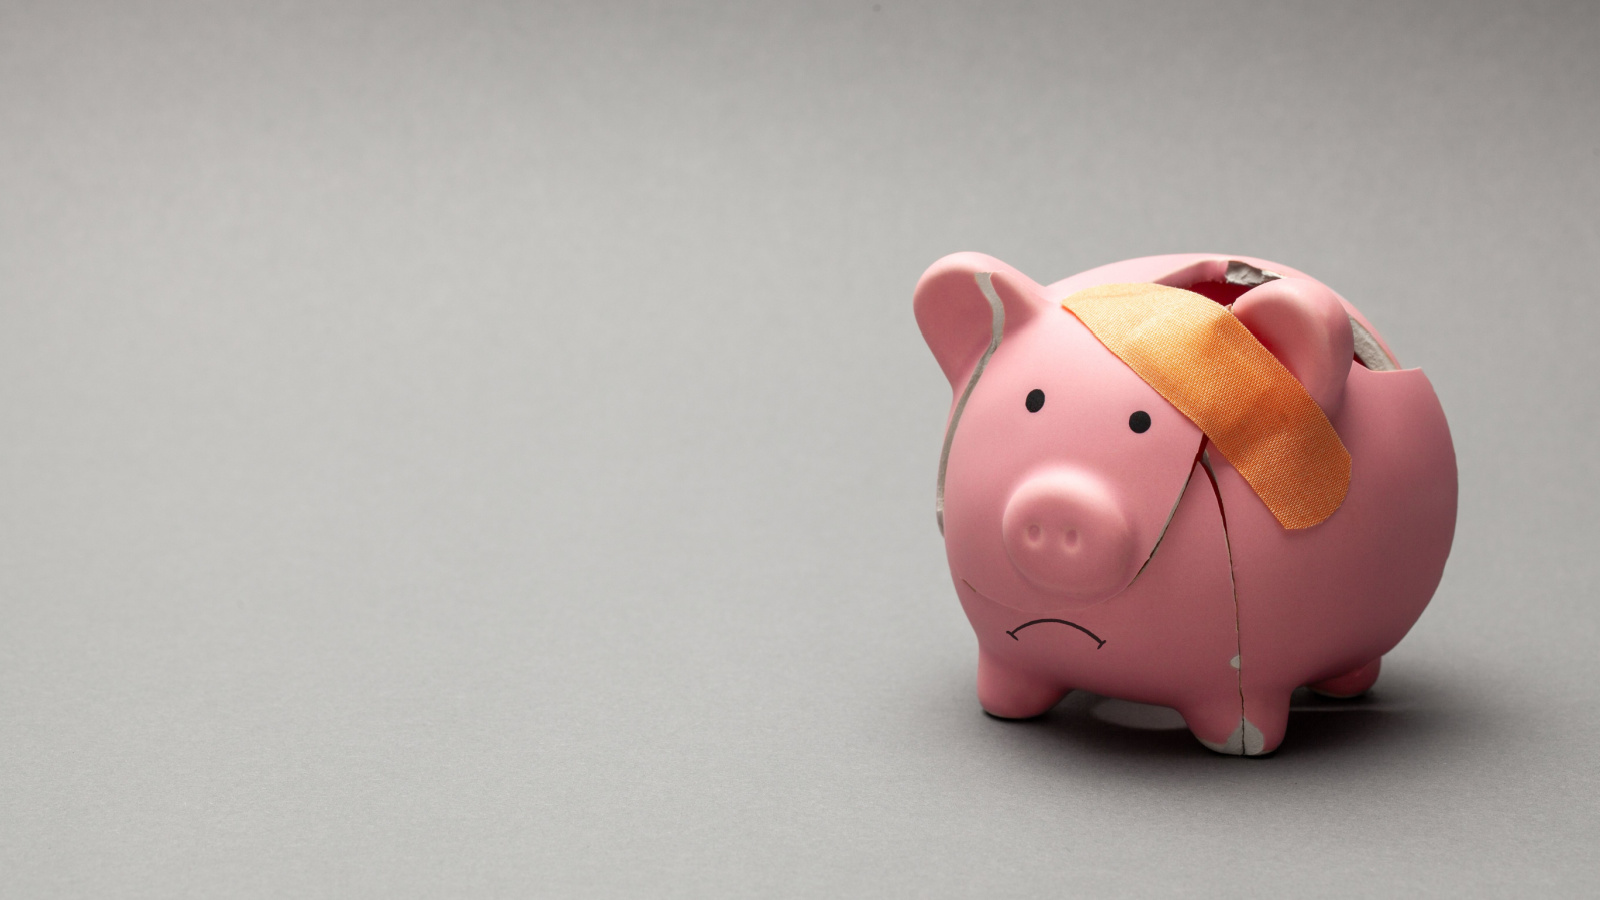 Photo of broken piggy bank with cracks on body and frown being held together by a band-aid. Gray background.